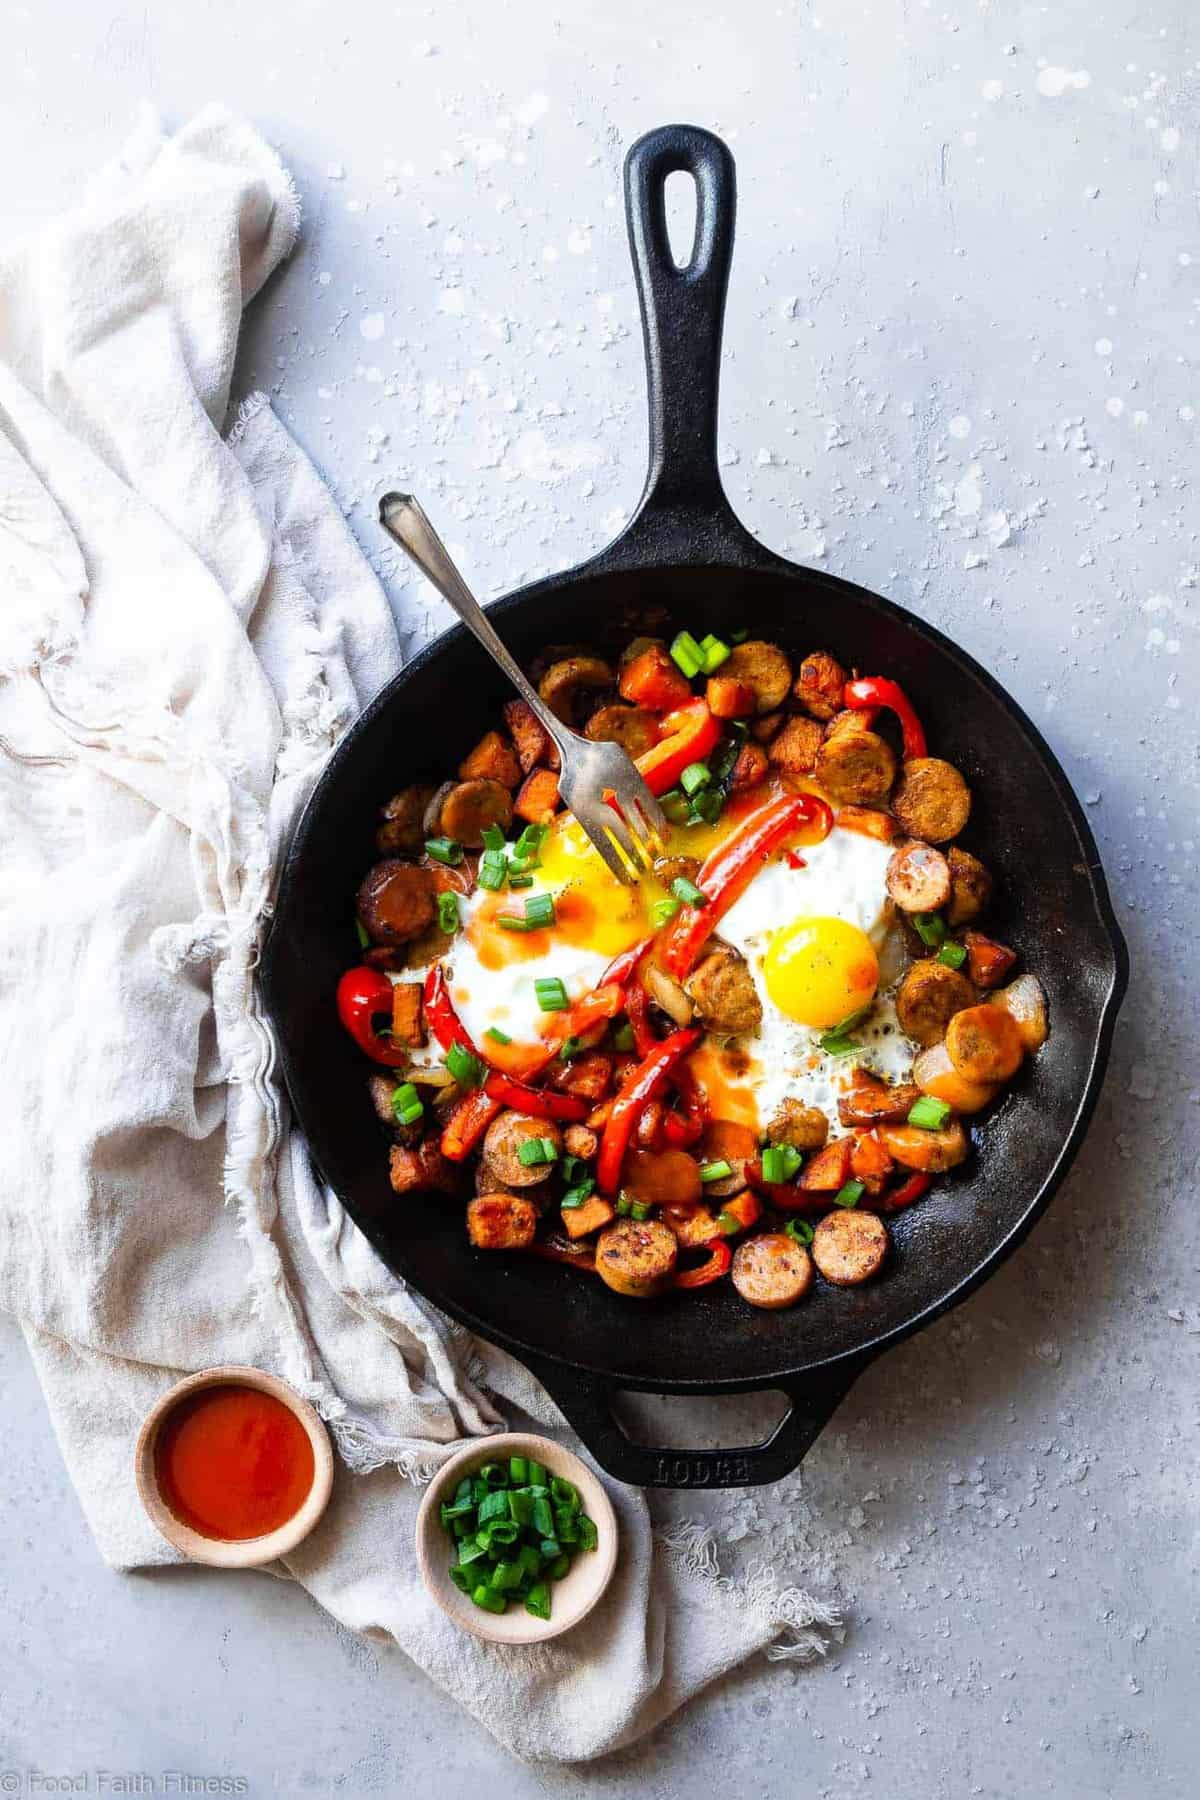 Buffalo Chicken Paleo Sweet Potato Hash Recipe - A game day spin on a classic breakfast that will be hit with even picky eaters! It's a quick and easy breakfast OR dinner that is paleo and whole30 compliant too! | #Foodfaithfitness | 